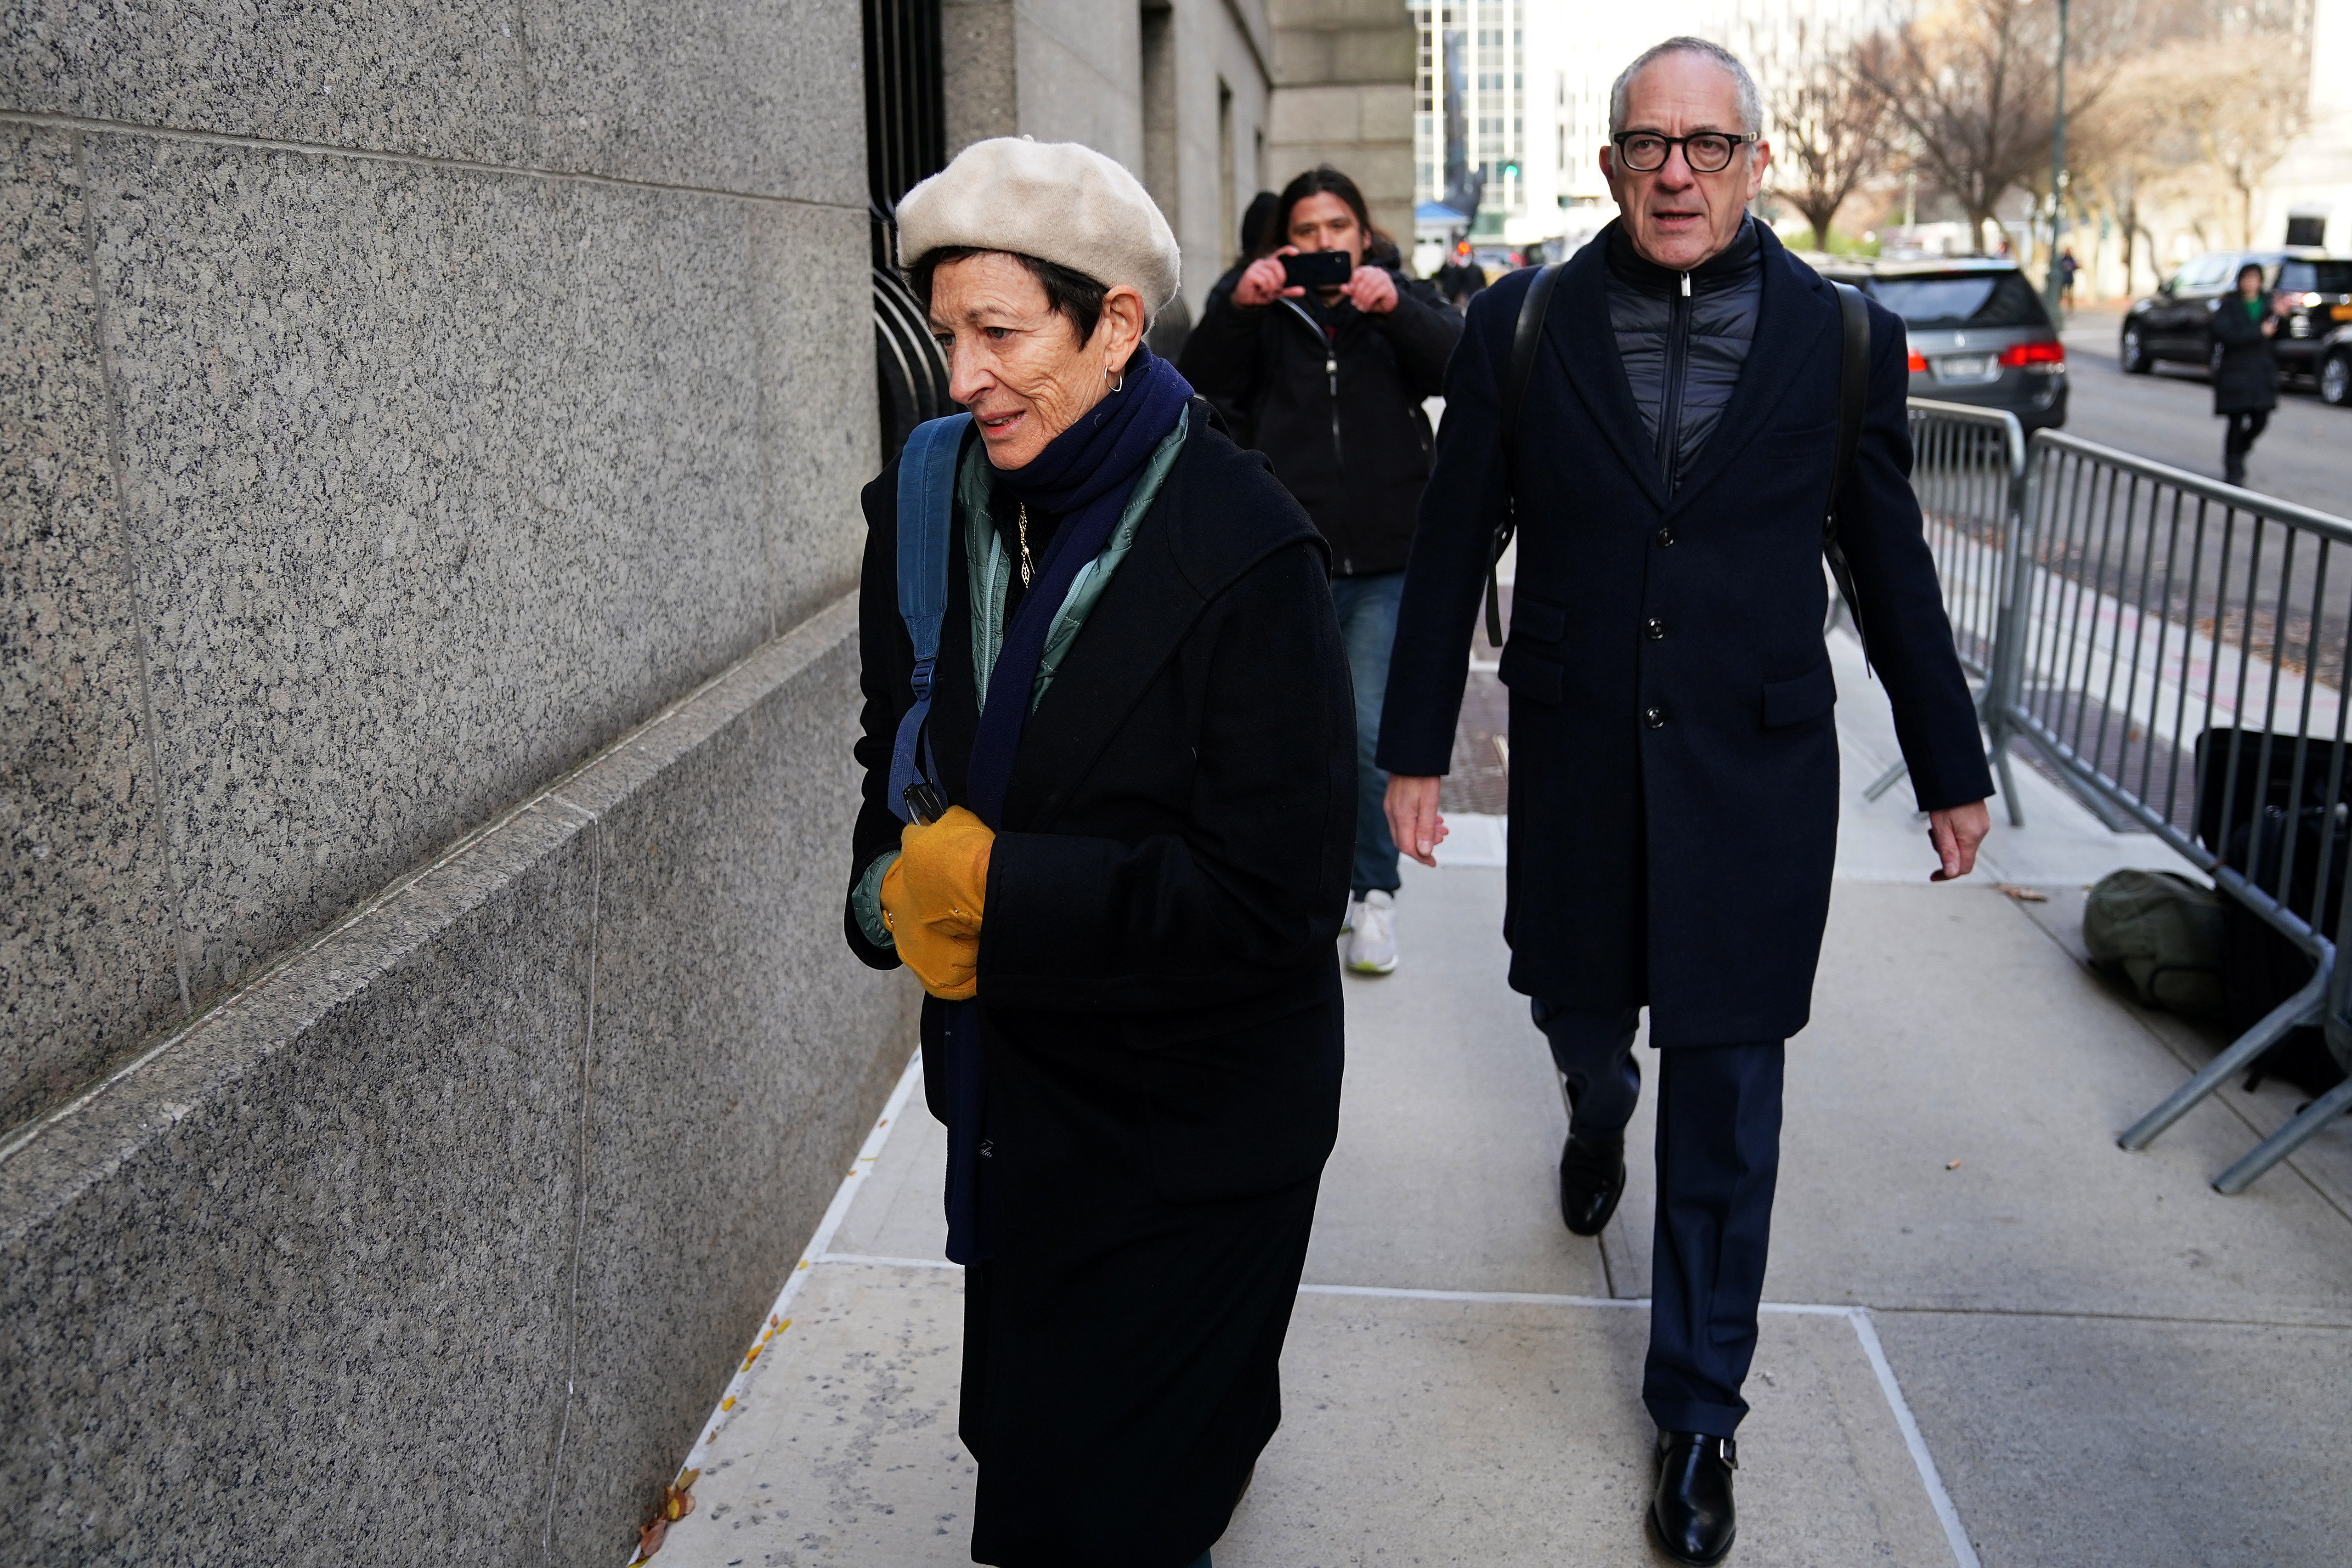 Isabel Maxwell and Kevin Maxwell, brother and sister of Ghislaine Maxwell, arrive at court during the seventh day of the Ghislaine Maxwell trial in the Manhattan borough of New York City, New York, U.S., December 7, 2021.  REUTERS/Carlo Allegri